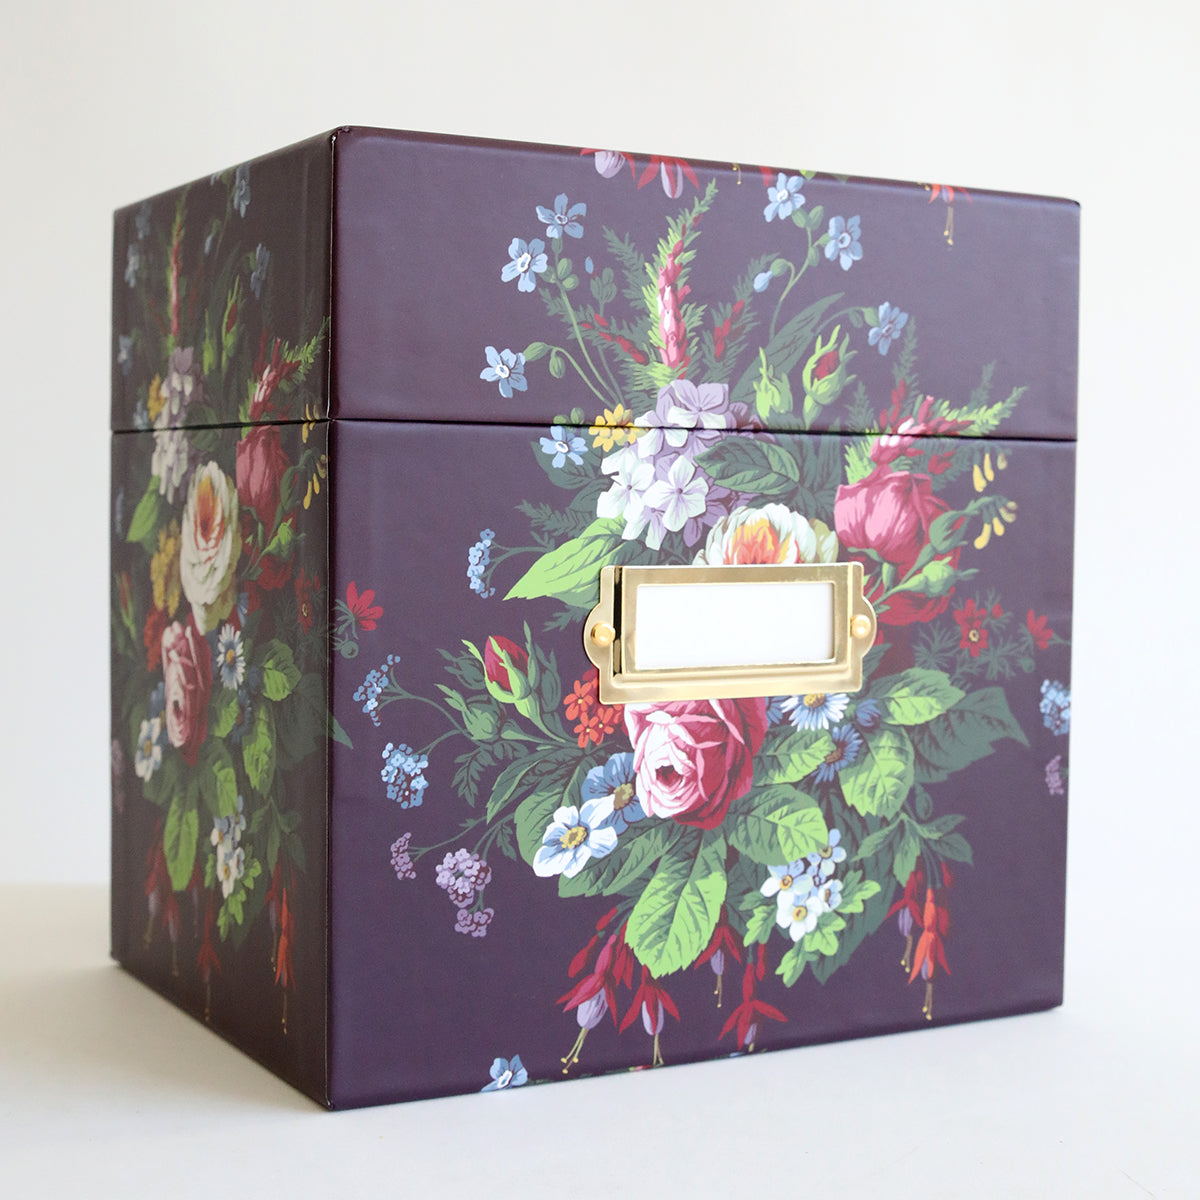 A purple Embossing Folder Storage Box - Astrid with flowers on it.